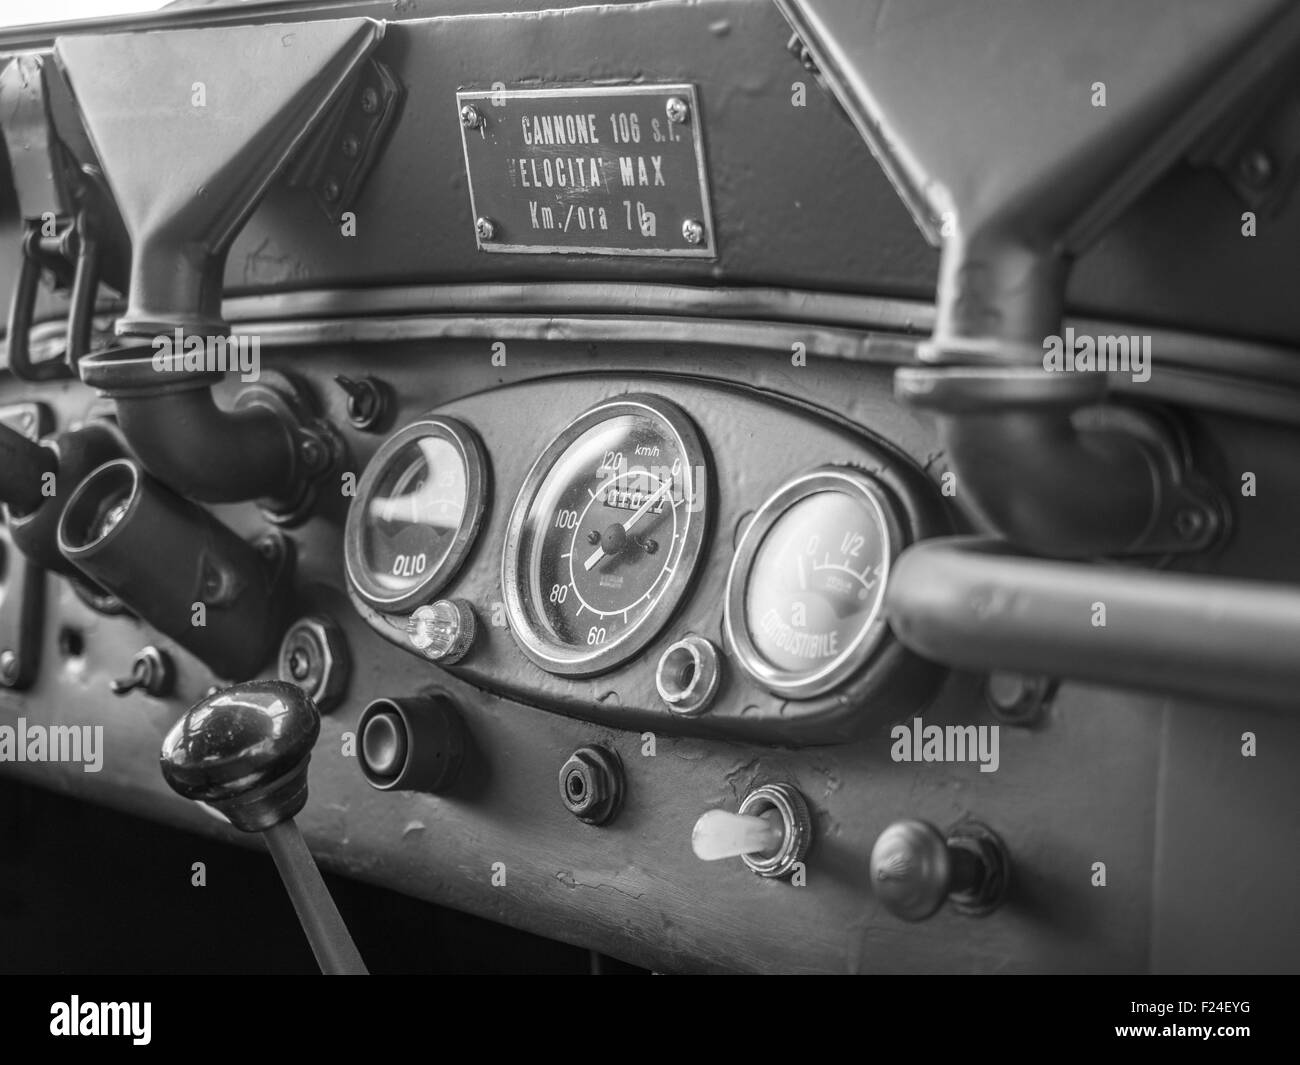 Dashboard of an old green military jeep. Stock Photo